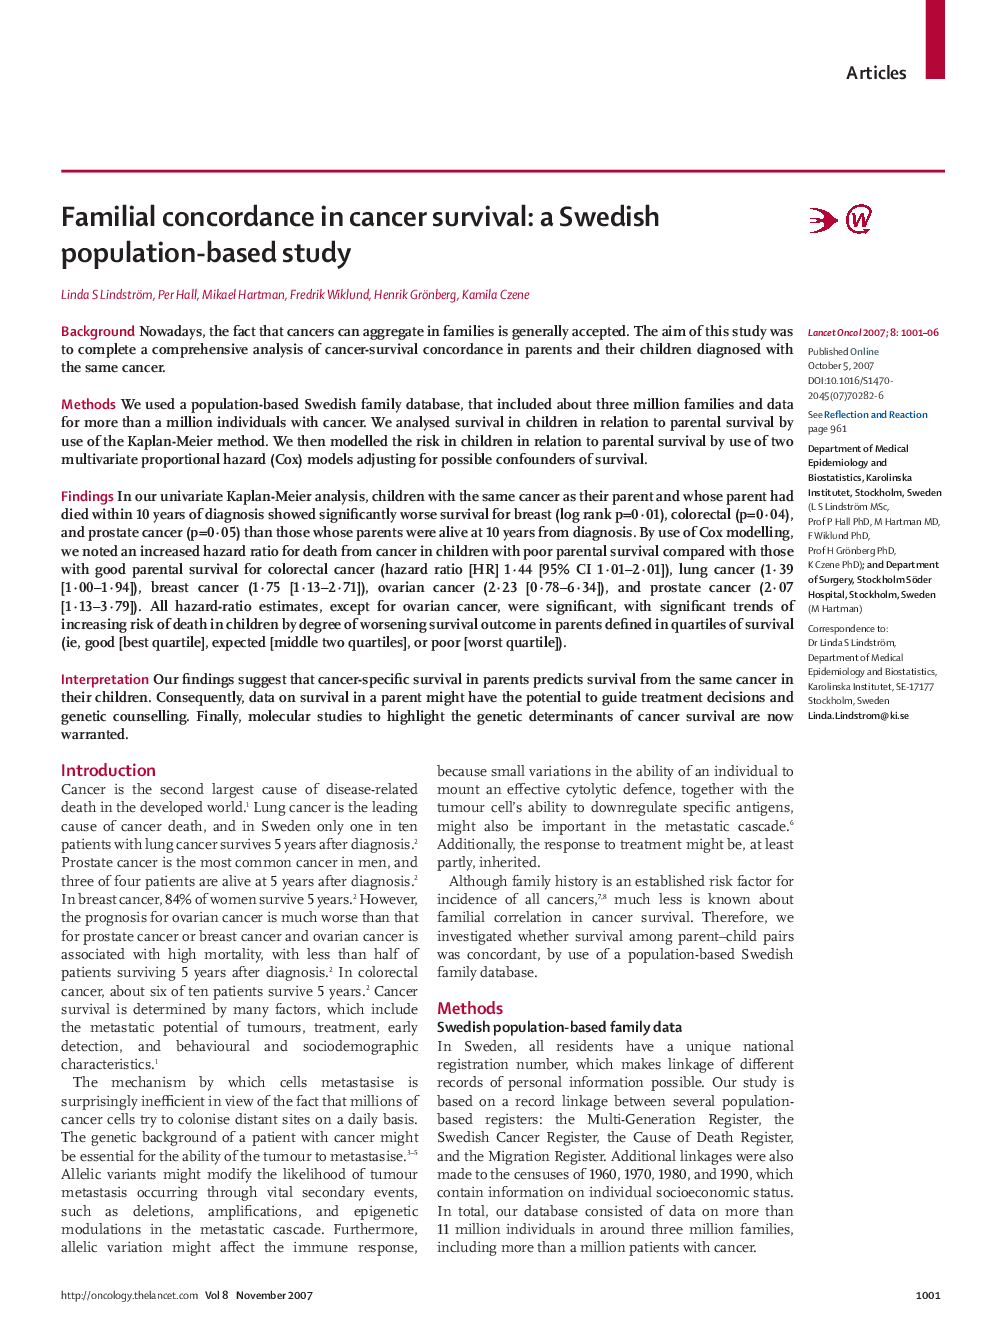 Familial concordance in cancer survival: a Swedish population-based study